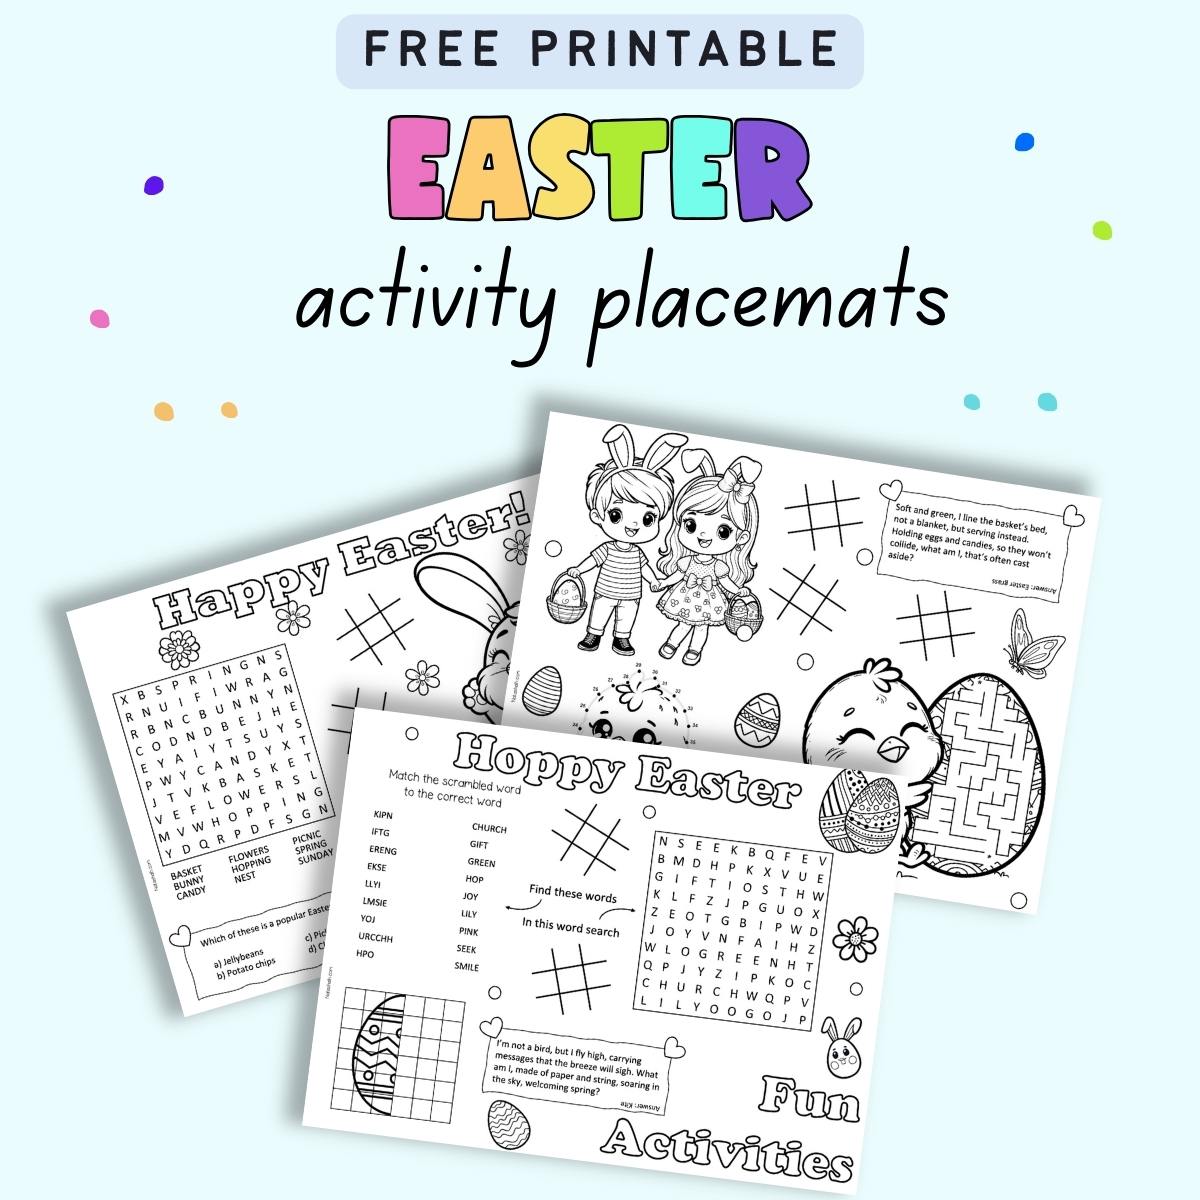 Text "free printable Easter activity placemats" with a preview of three placemat printables